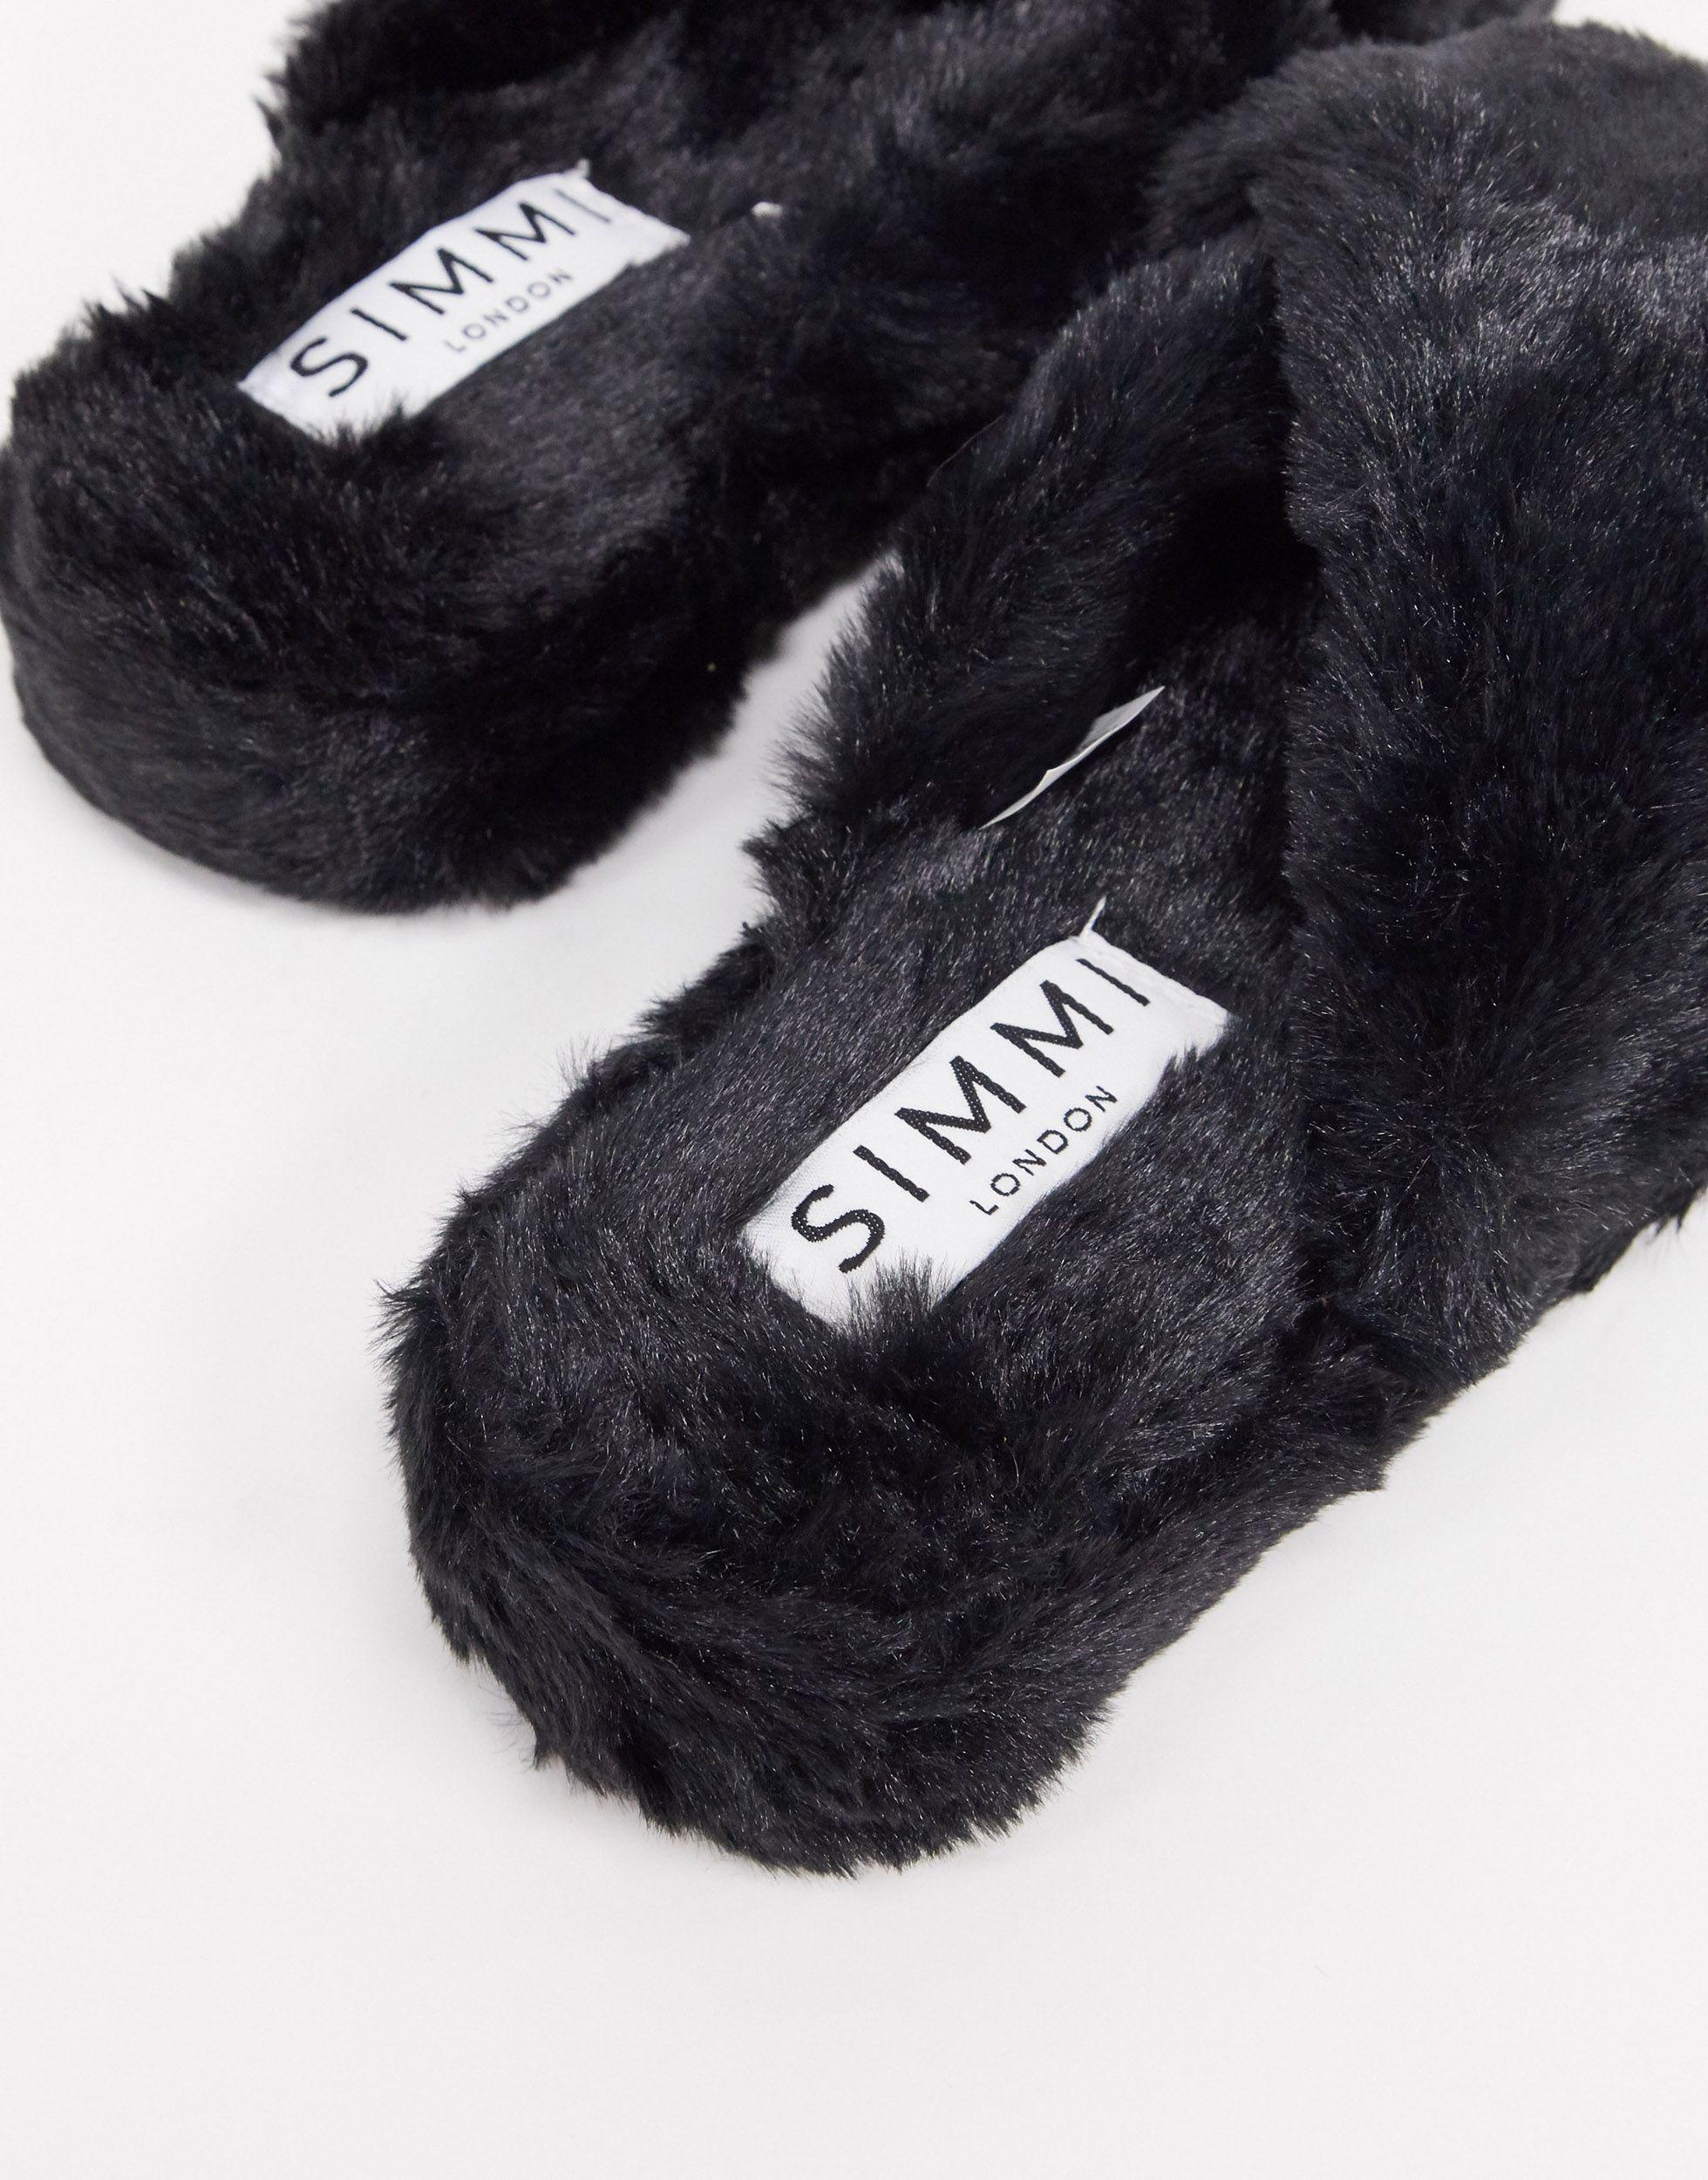 SIMMI Shoes Simmi London Fluffy Slippers in Black - Lyst